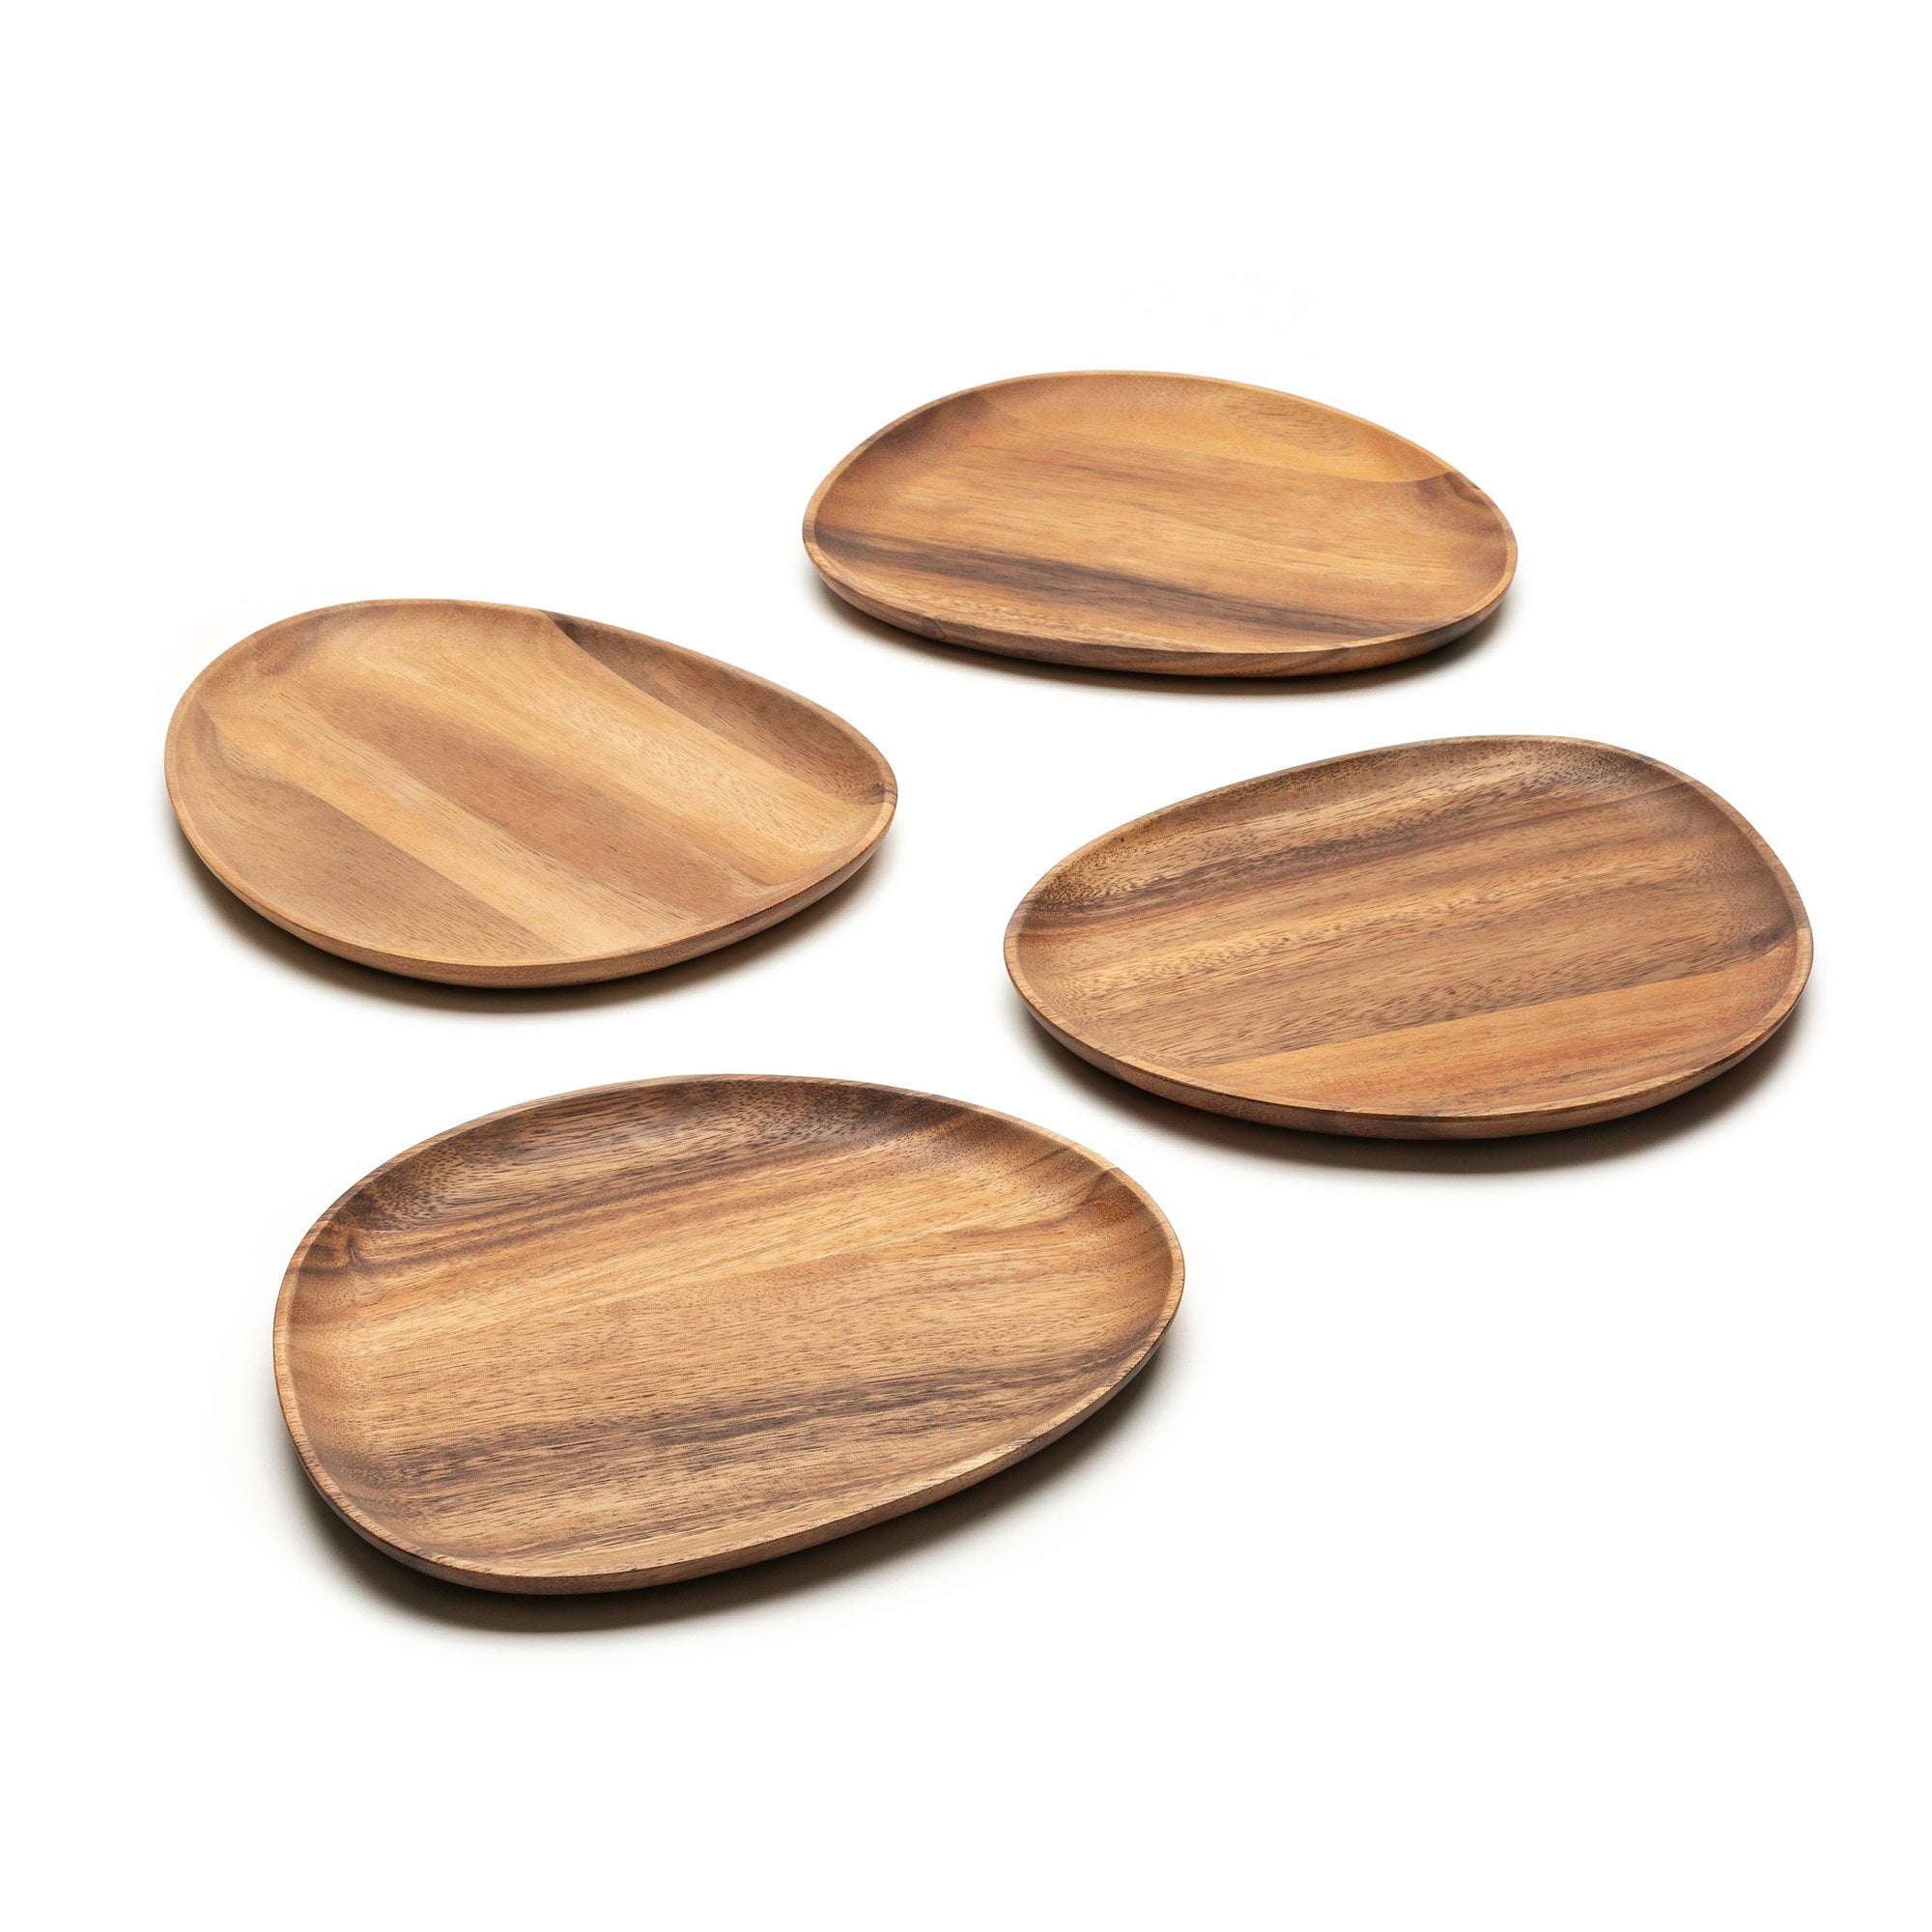 Four small wooden plates